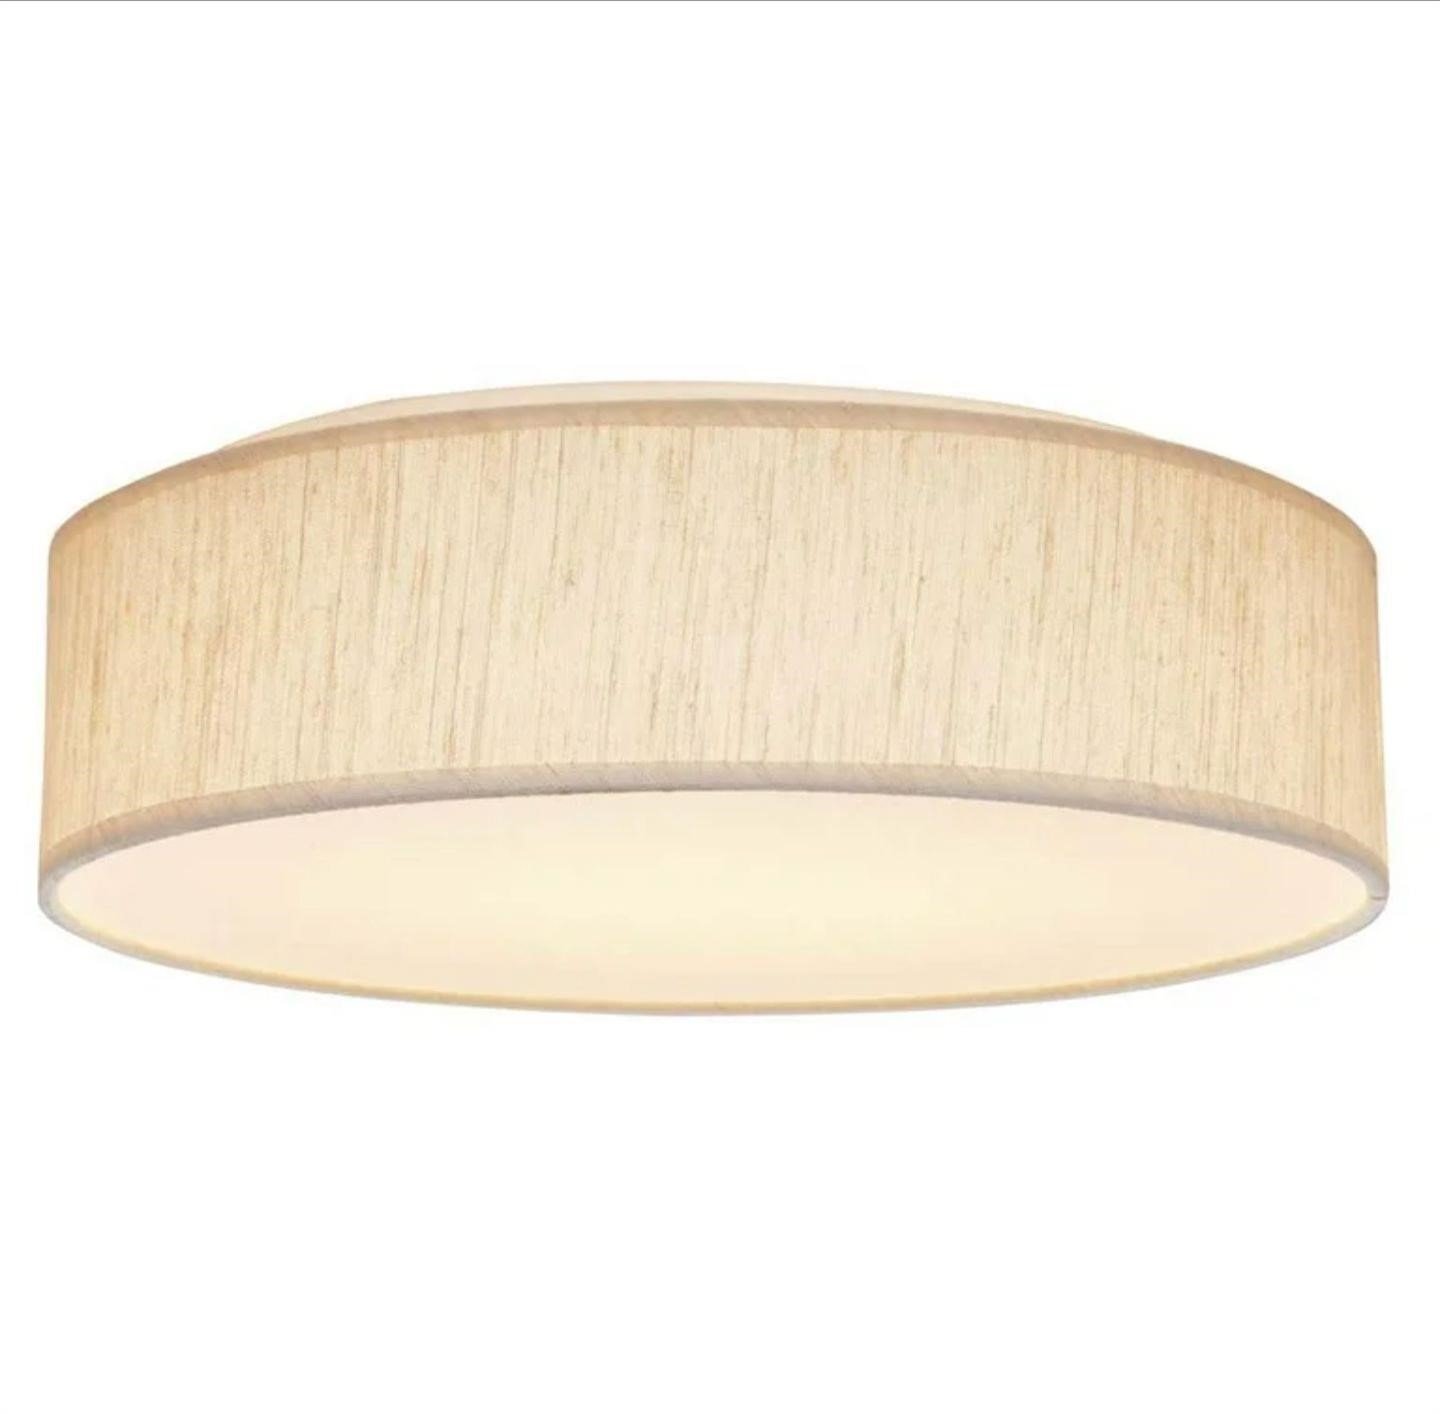 ($125) 20w 15-in Tunable Beige Fabric Drum LED